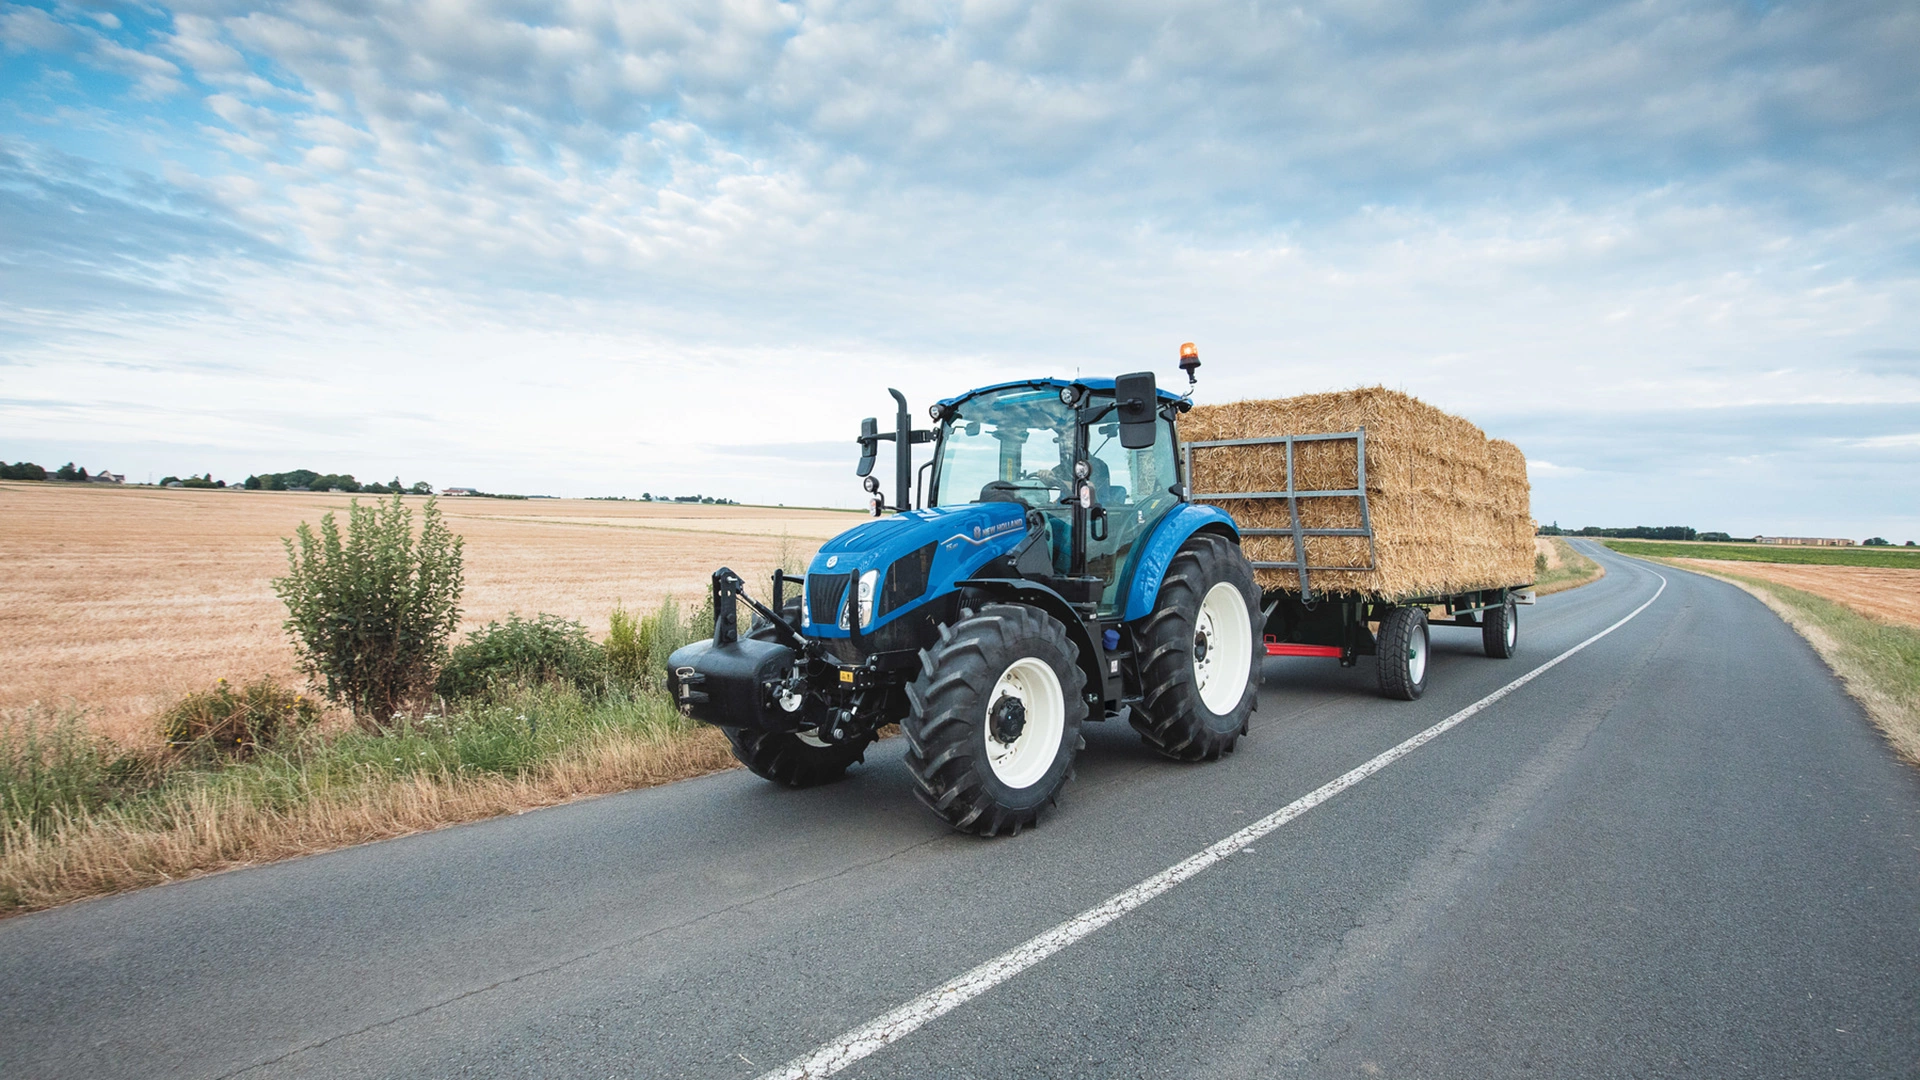 Farm goods transportation underway with New Holland T5 Utility agricultural tractor